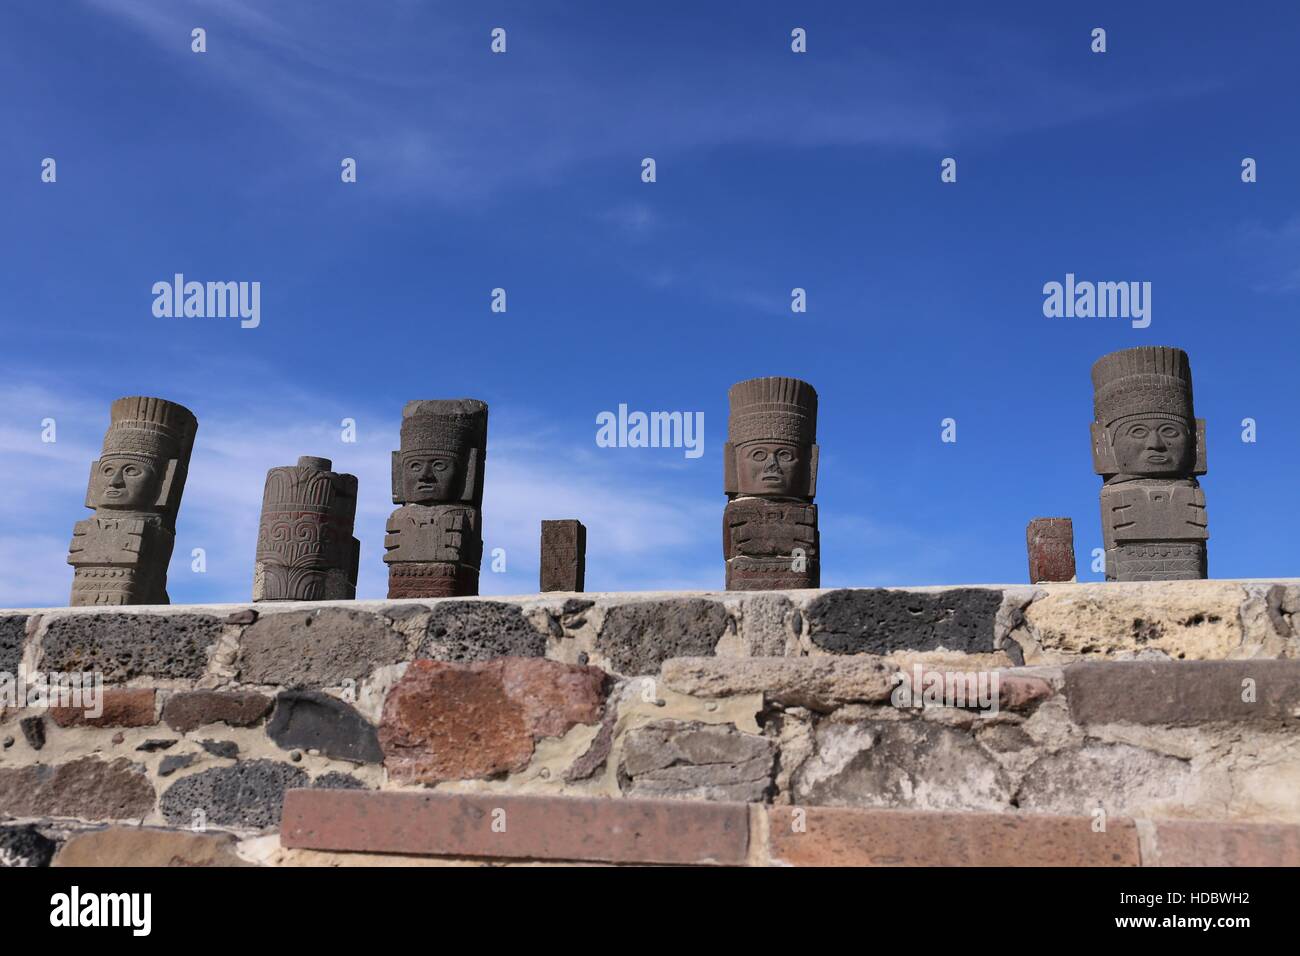 Toltec Warriors in Tula - Mesoamerican archaeological site, Mexico Stock Photo